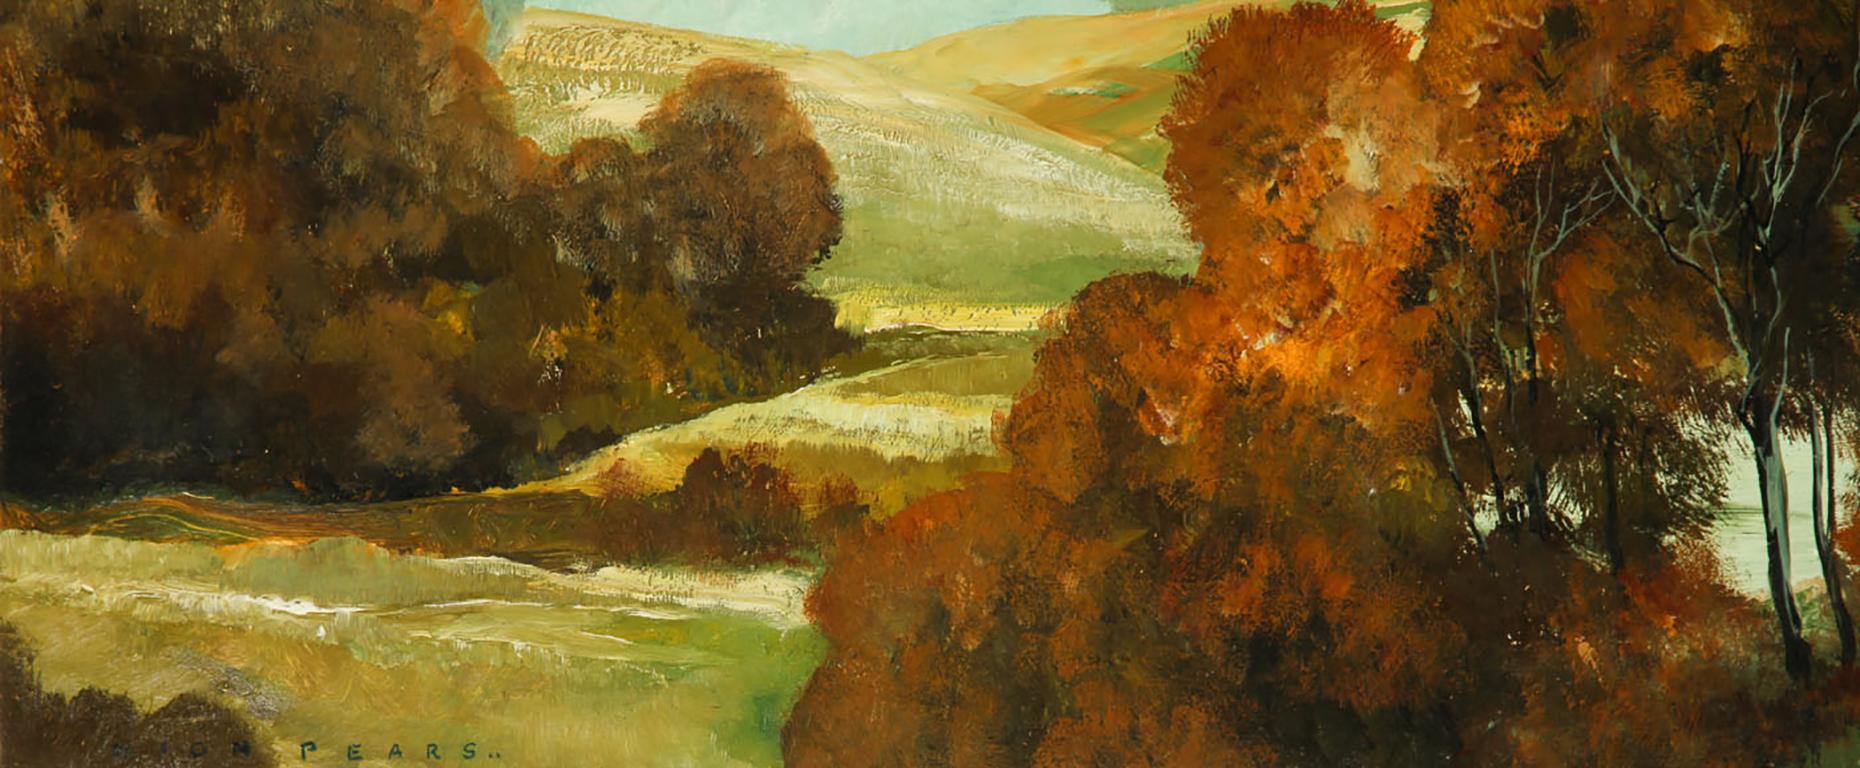 Dion Pears - Framed Mid 20th Century Oil, Autumnal Landscape 1